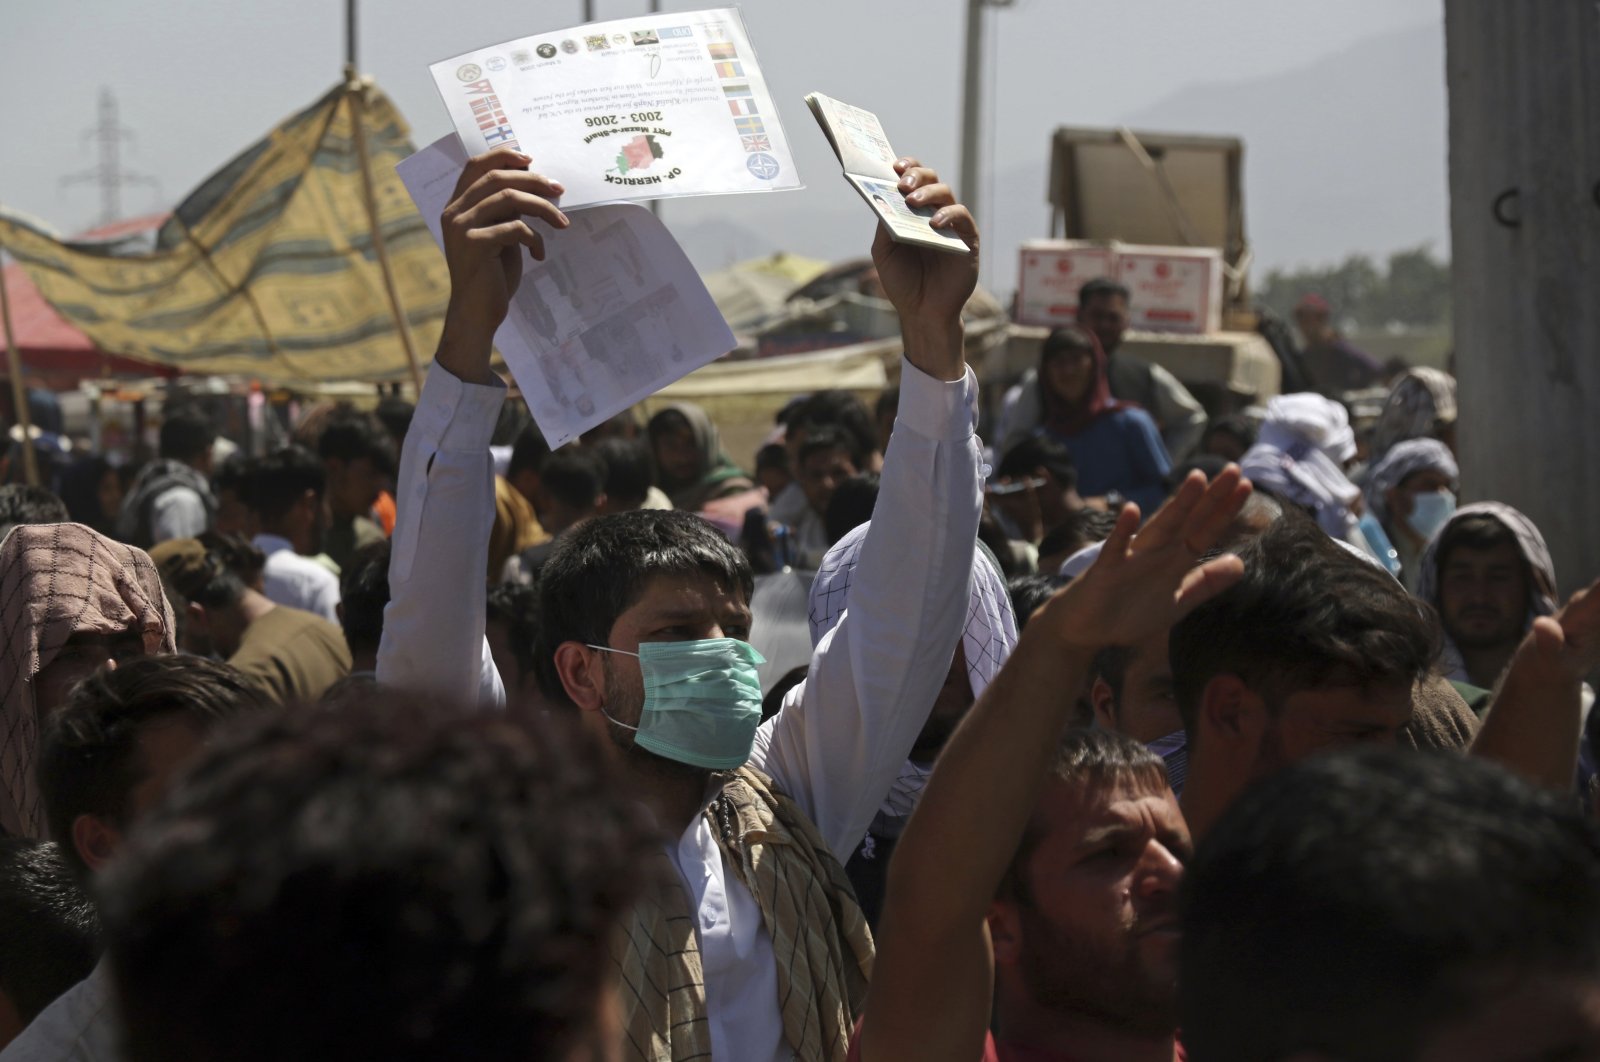 Hundreds of people gather, some holding documents, near an evacuation control checkpoint on the perimeter of the Hamid Karzai International Airport, in Kabul, Afghanistan, Aug. 26, 2021. (AP Photo)